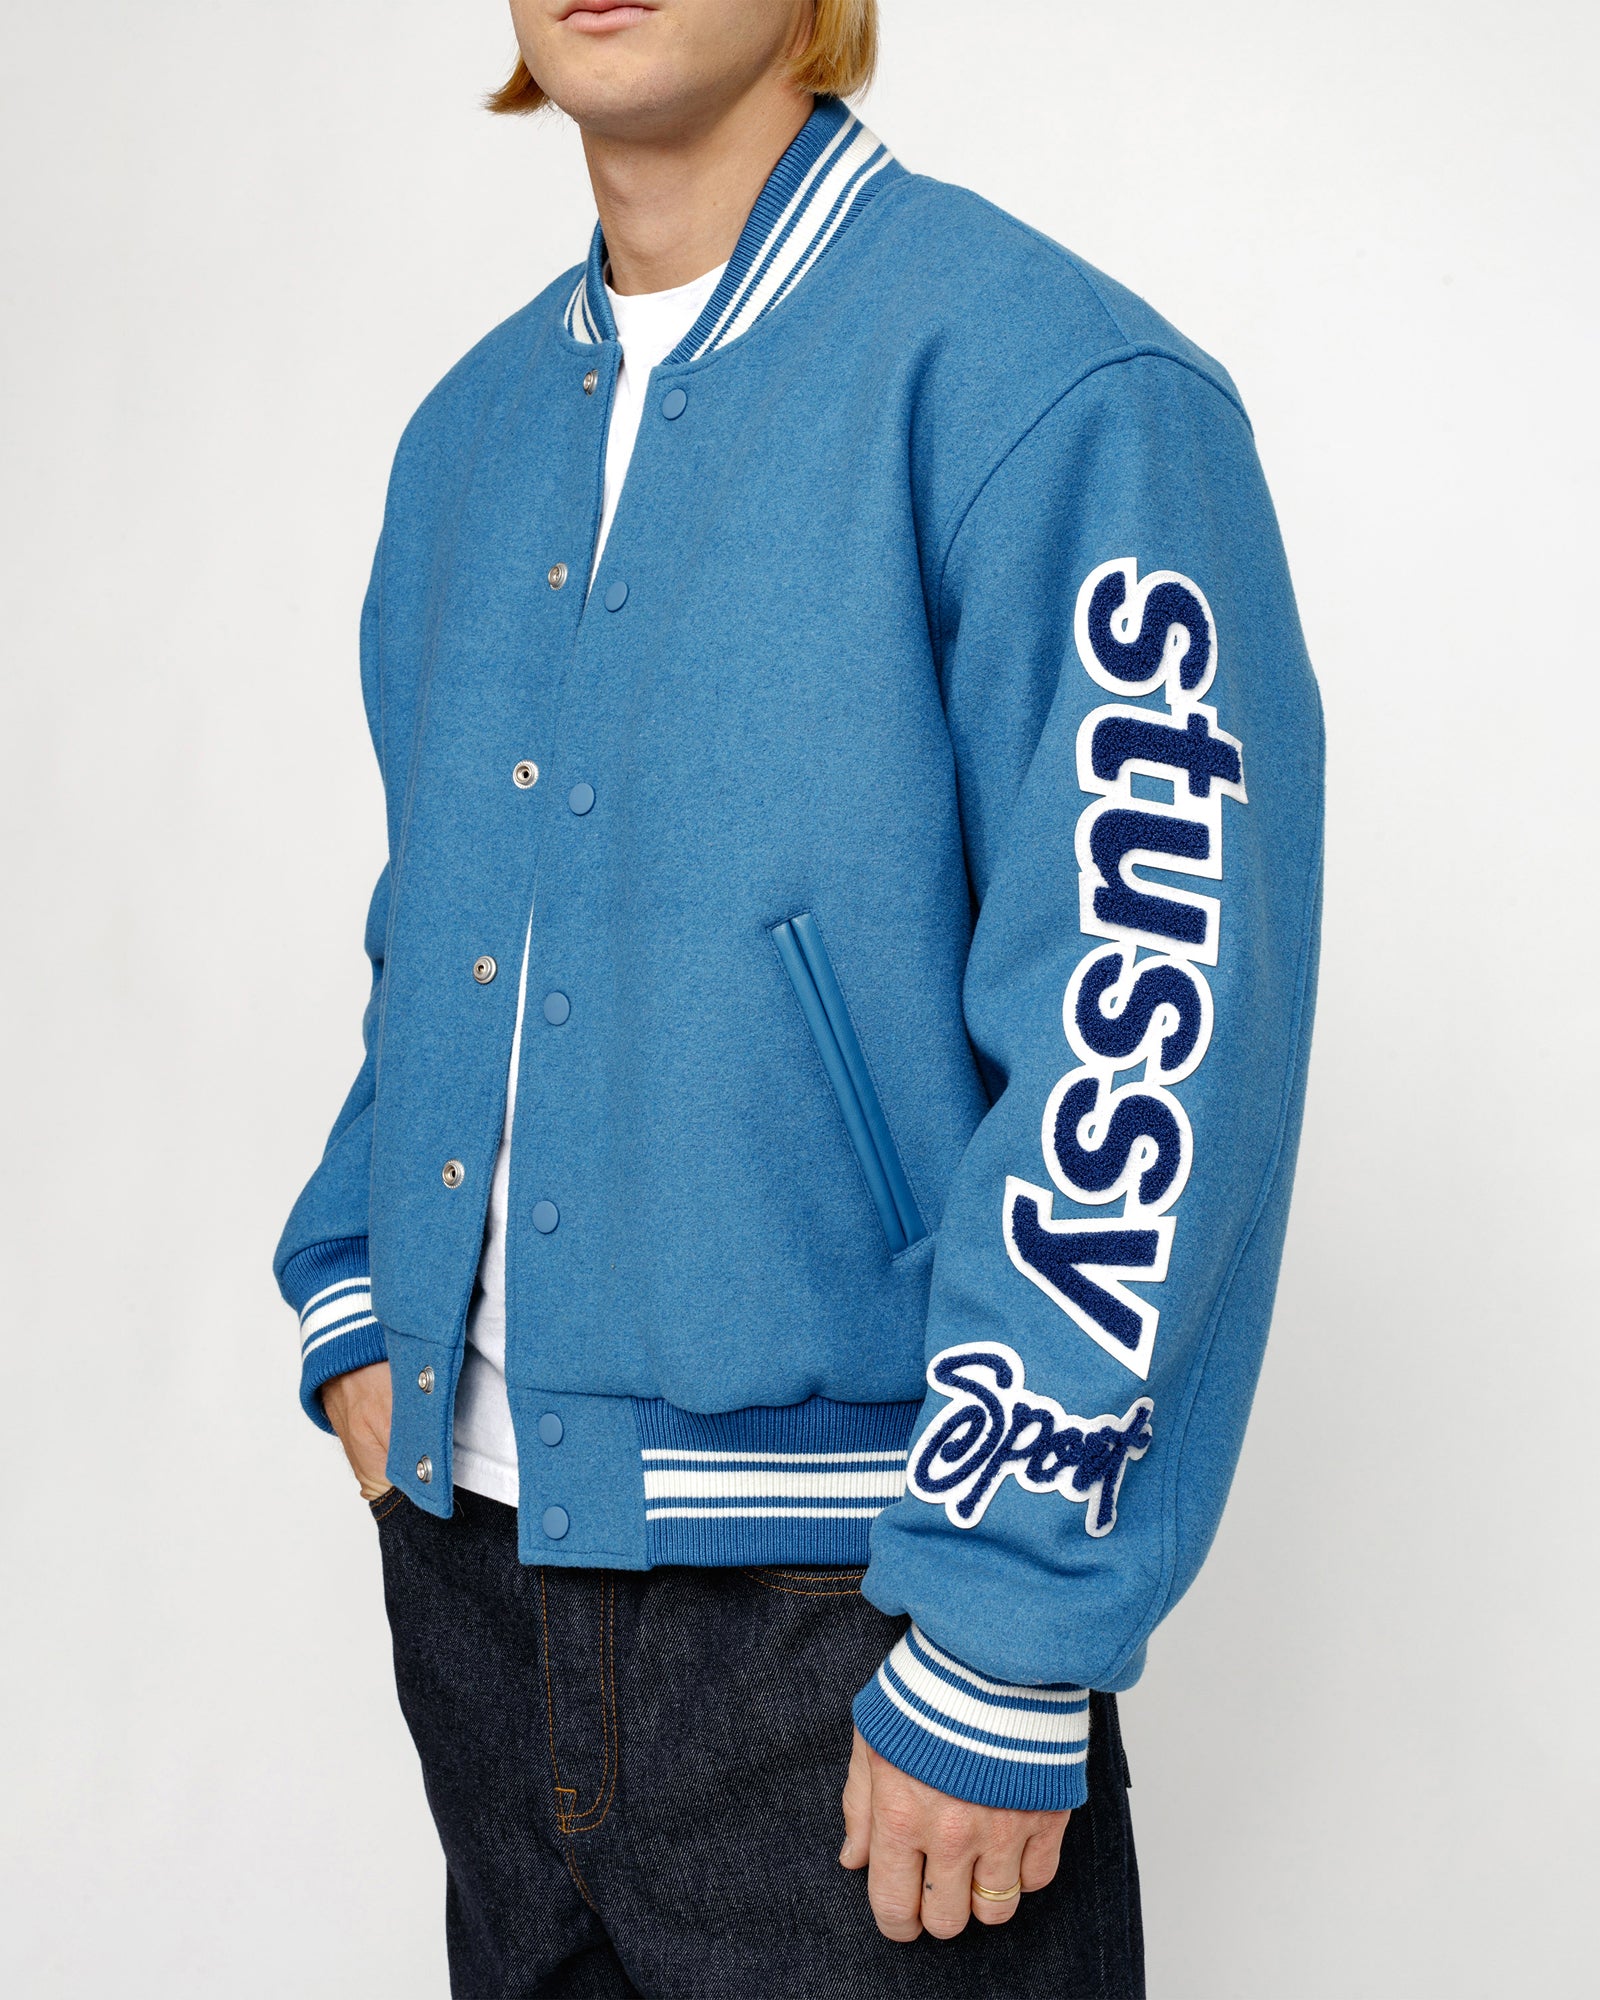 VARSITY JACKET COMPETITION BLUE OUTERWEAR